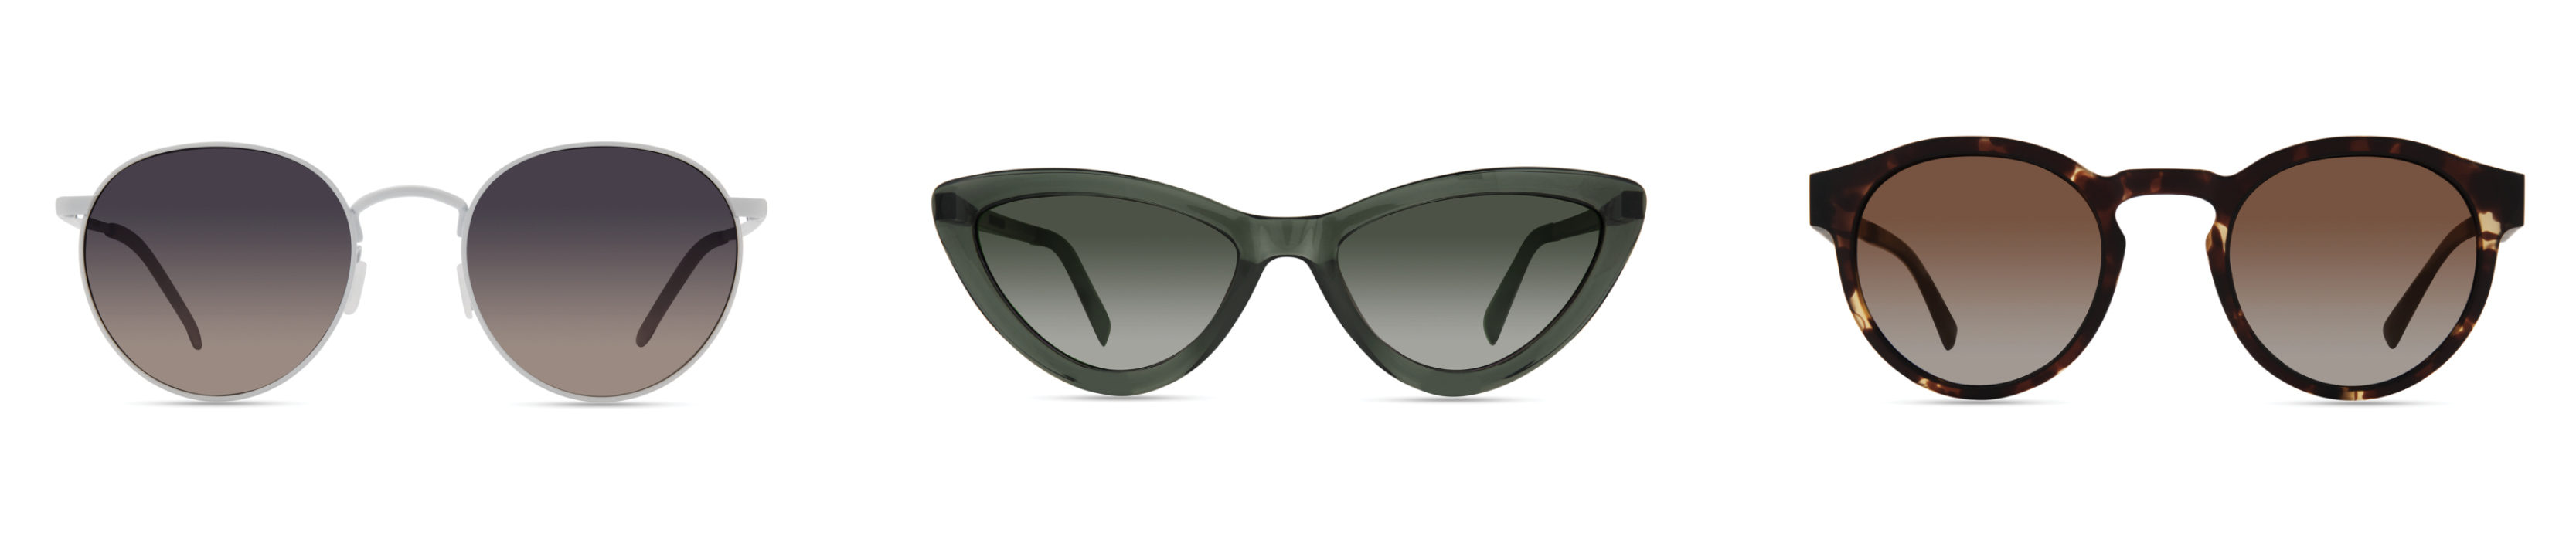 Trending Sunglasses, Eco Eyewear by MODO, Spring 2019 Collection - RG Daily Blog